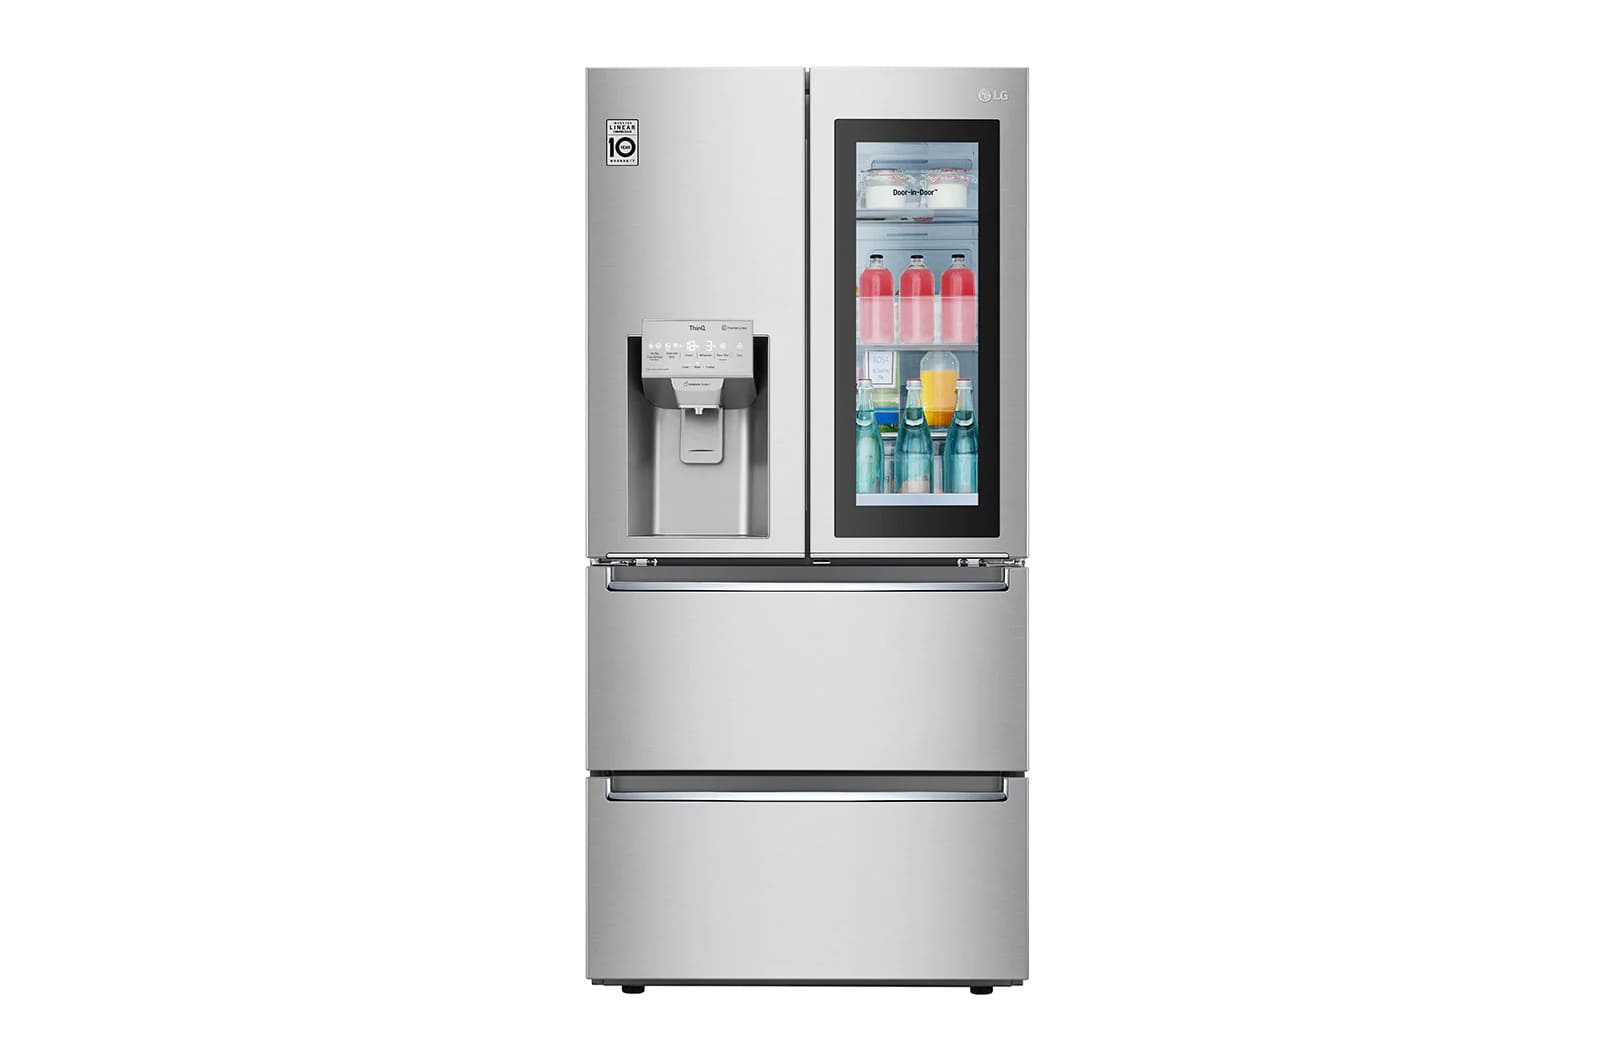 LG - 32.875 Inch 18.3 cu. ft French Door Refrigerator in Stainless - LRMVC1803S